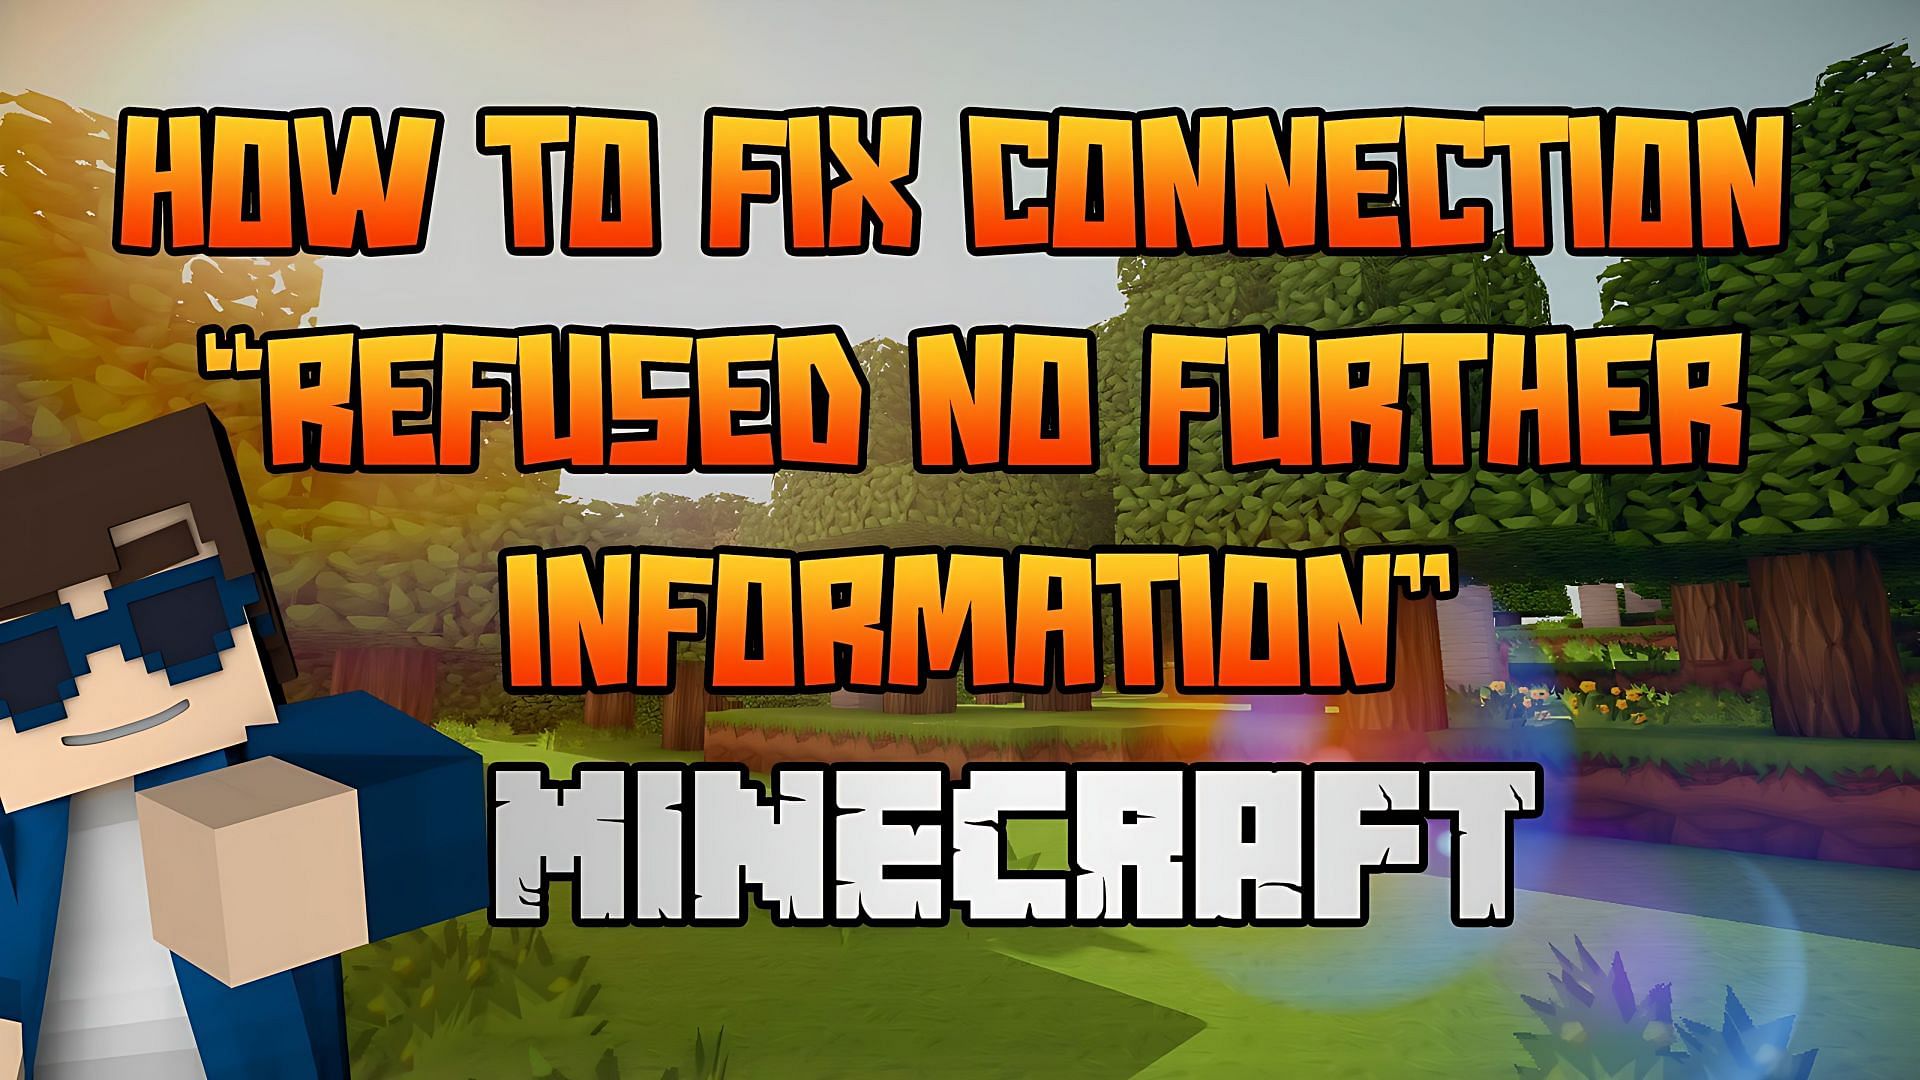 Connection errors can be annoying to run into in Minecraft (Image via Youtube/Scala Cube)